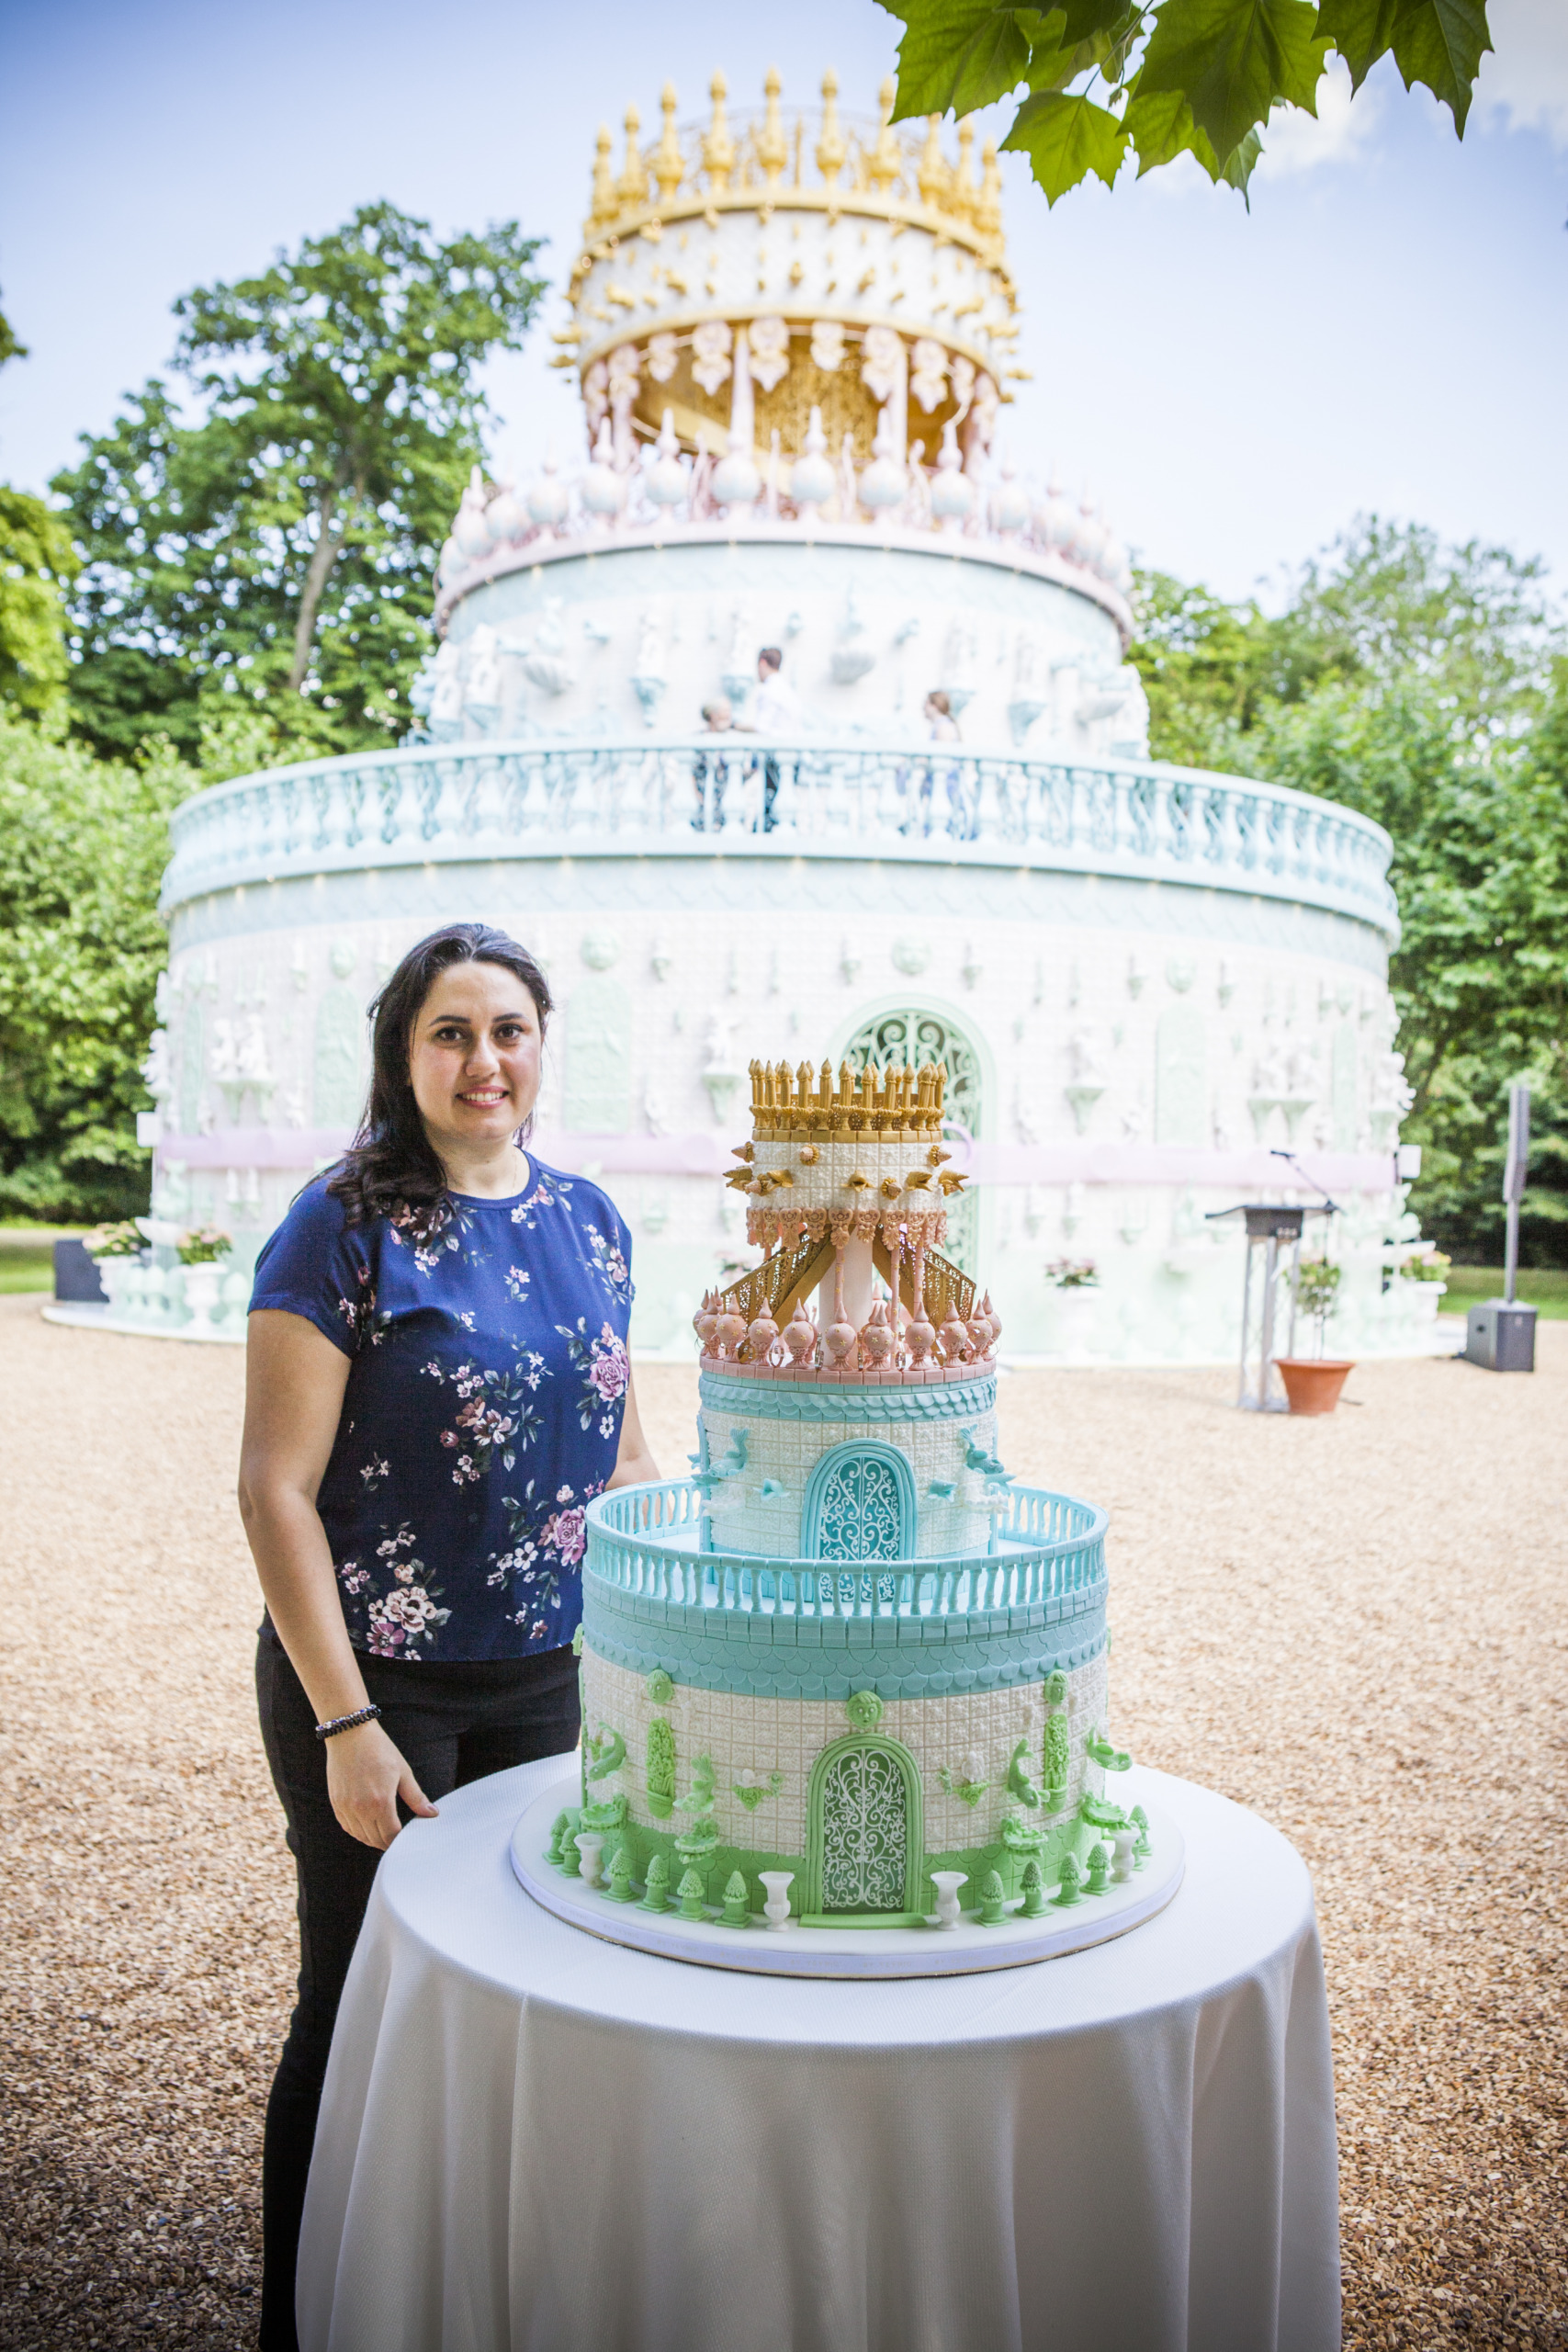 Yevnig Davis Creative Director of By Yevnig, stands next to her creation The Wedding Cake By Yevnig which sits in front of the Wedding Cake Folly, by Joana Vasconcelos at Waddesdon Manor